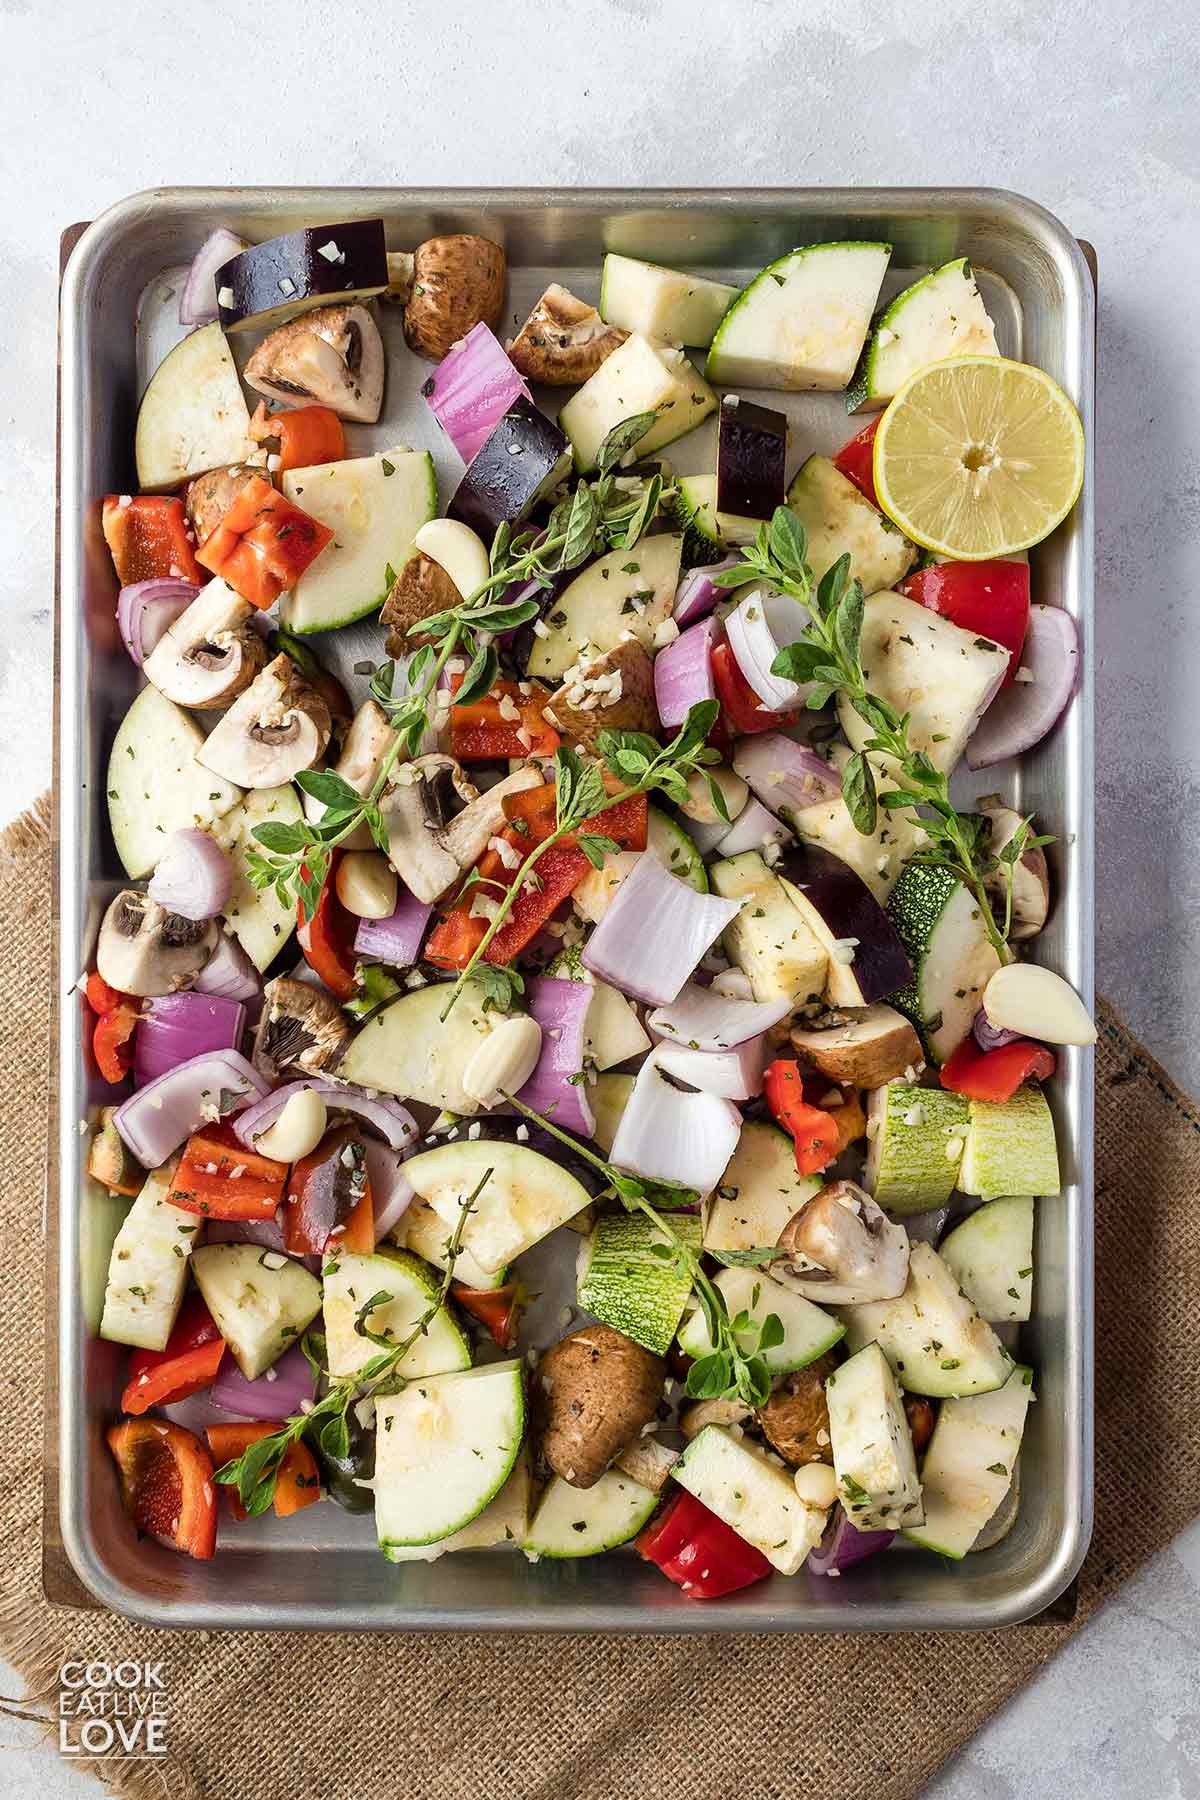 Tray of marinated vegetables on baking tray ready for the oven.